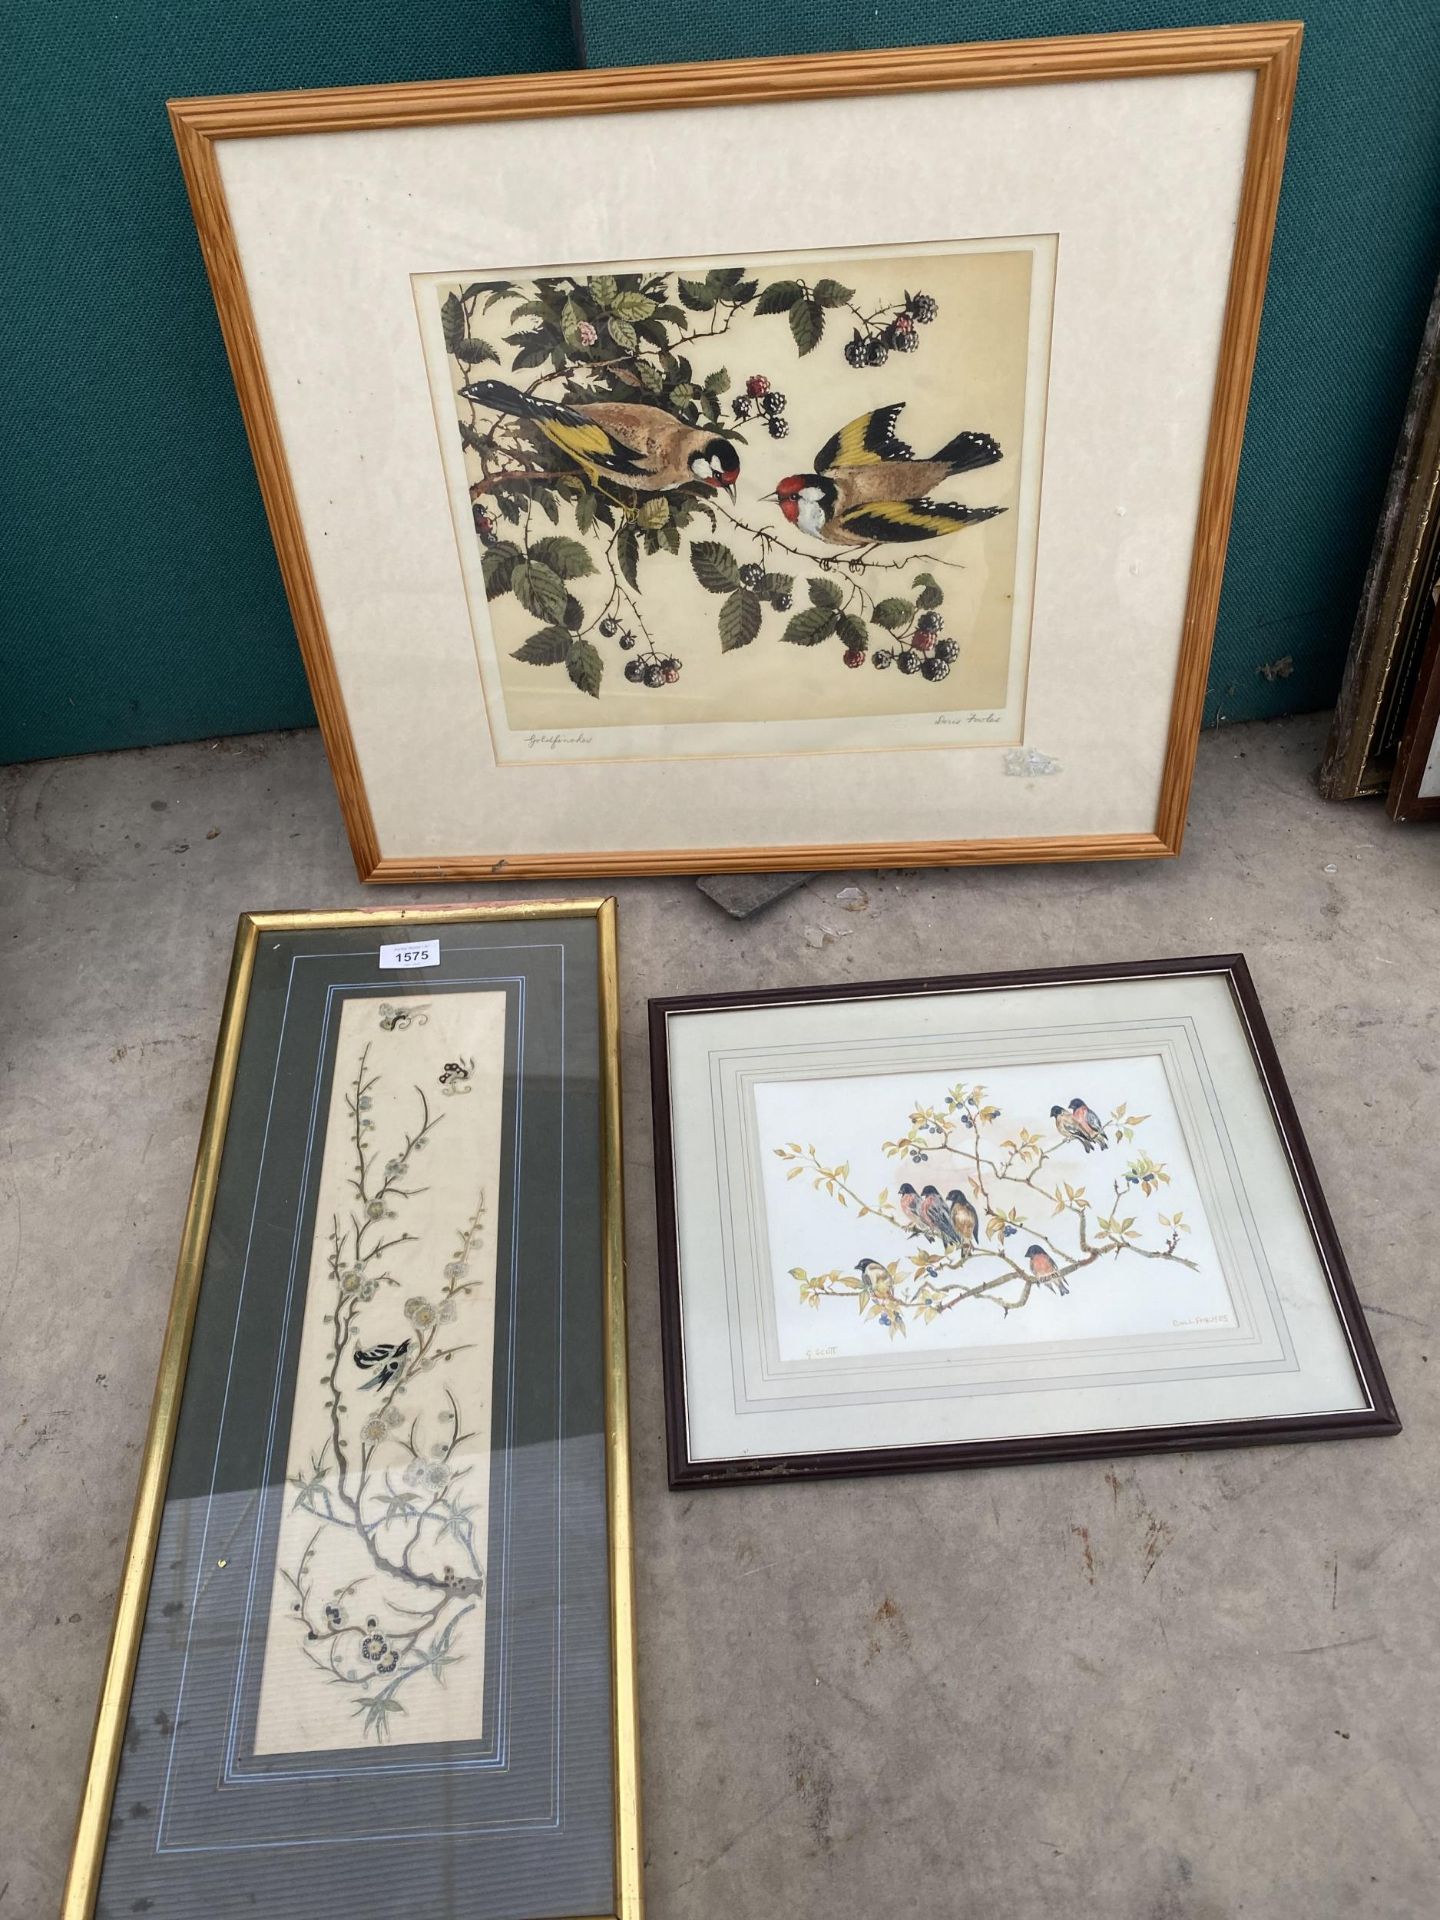 A DORIS FOWLES GOLDFINCHES PRINT, G.SCOTT BULL FINCHES PICTURE AND SILK PICTURE DEPICTING BIRDS - Image 2 of 3